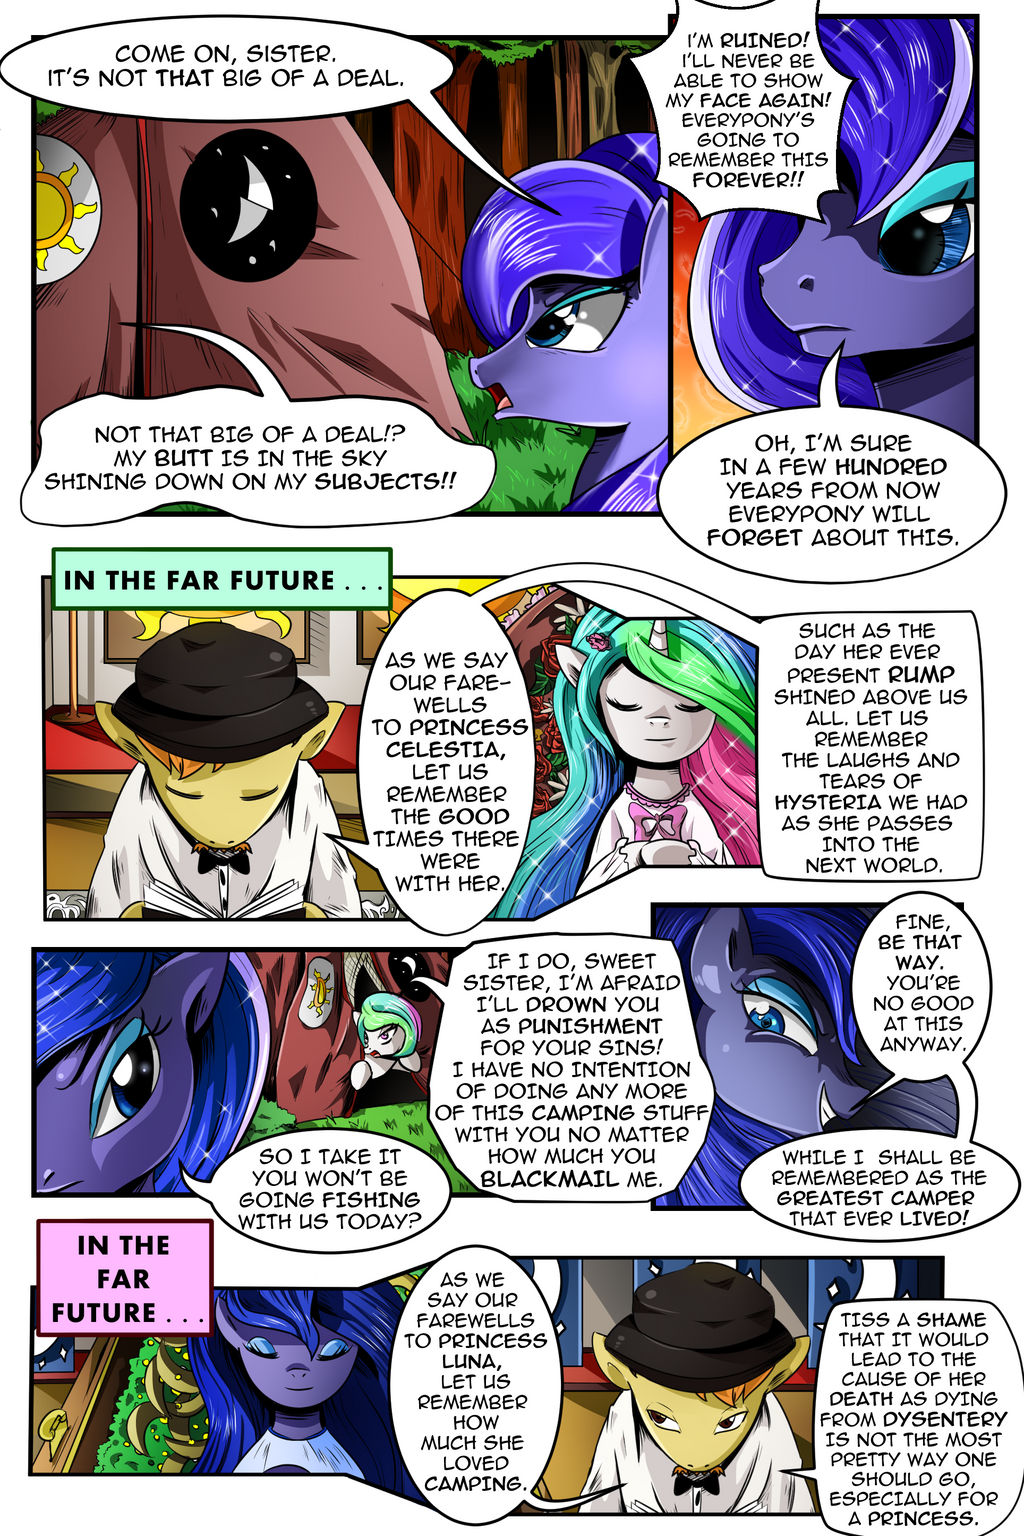 Two Sisters Go Camping Page 6 by Rated-R-PonyStar on DeviantArt